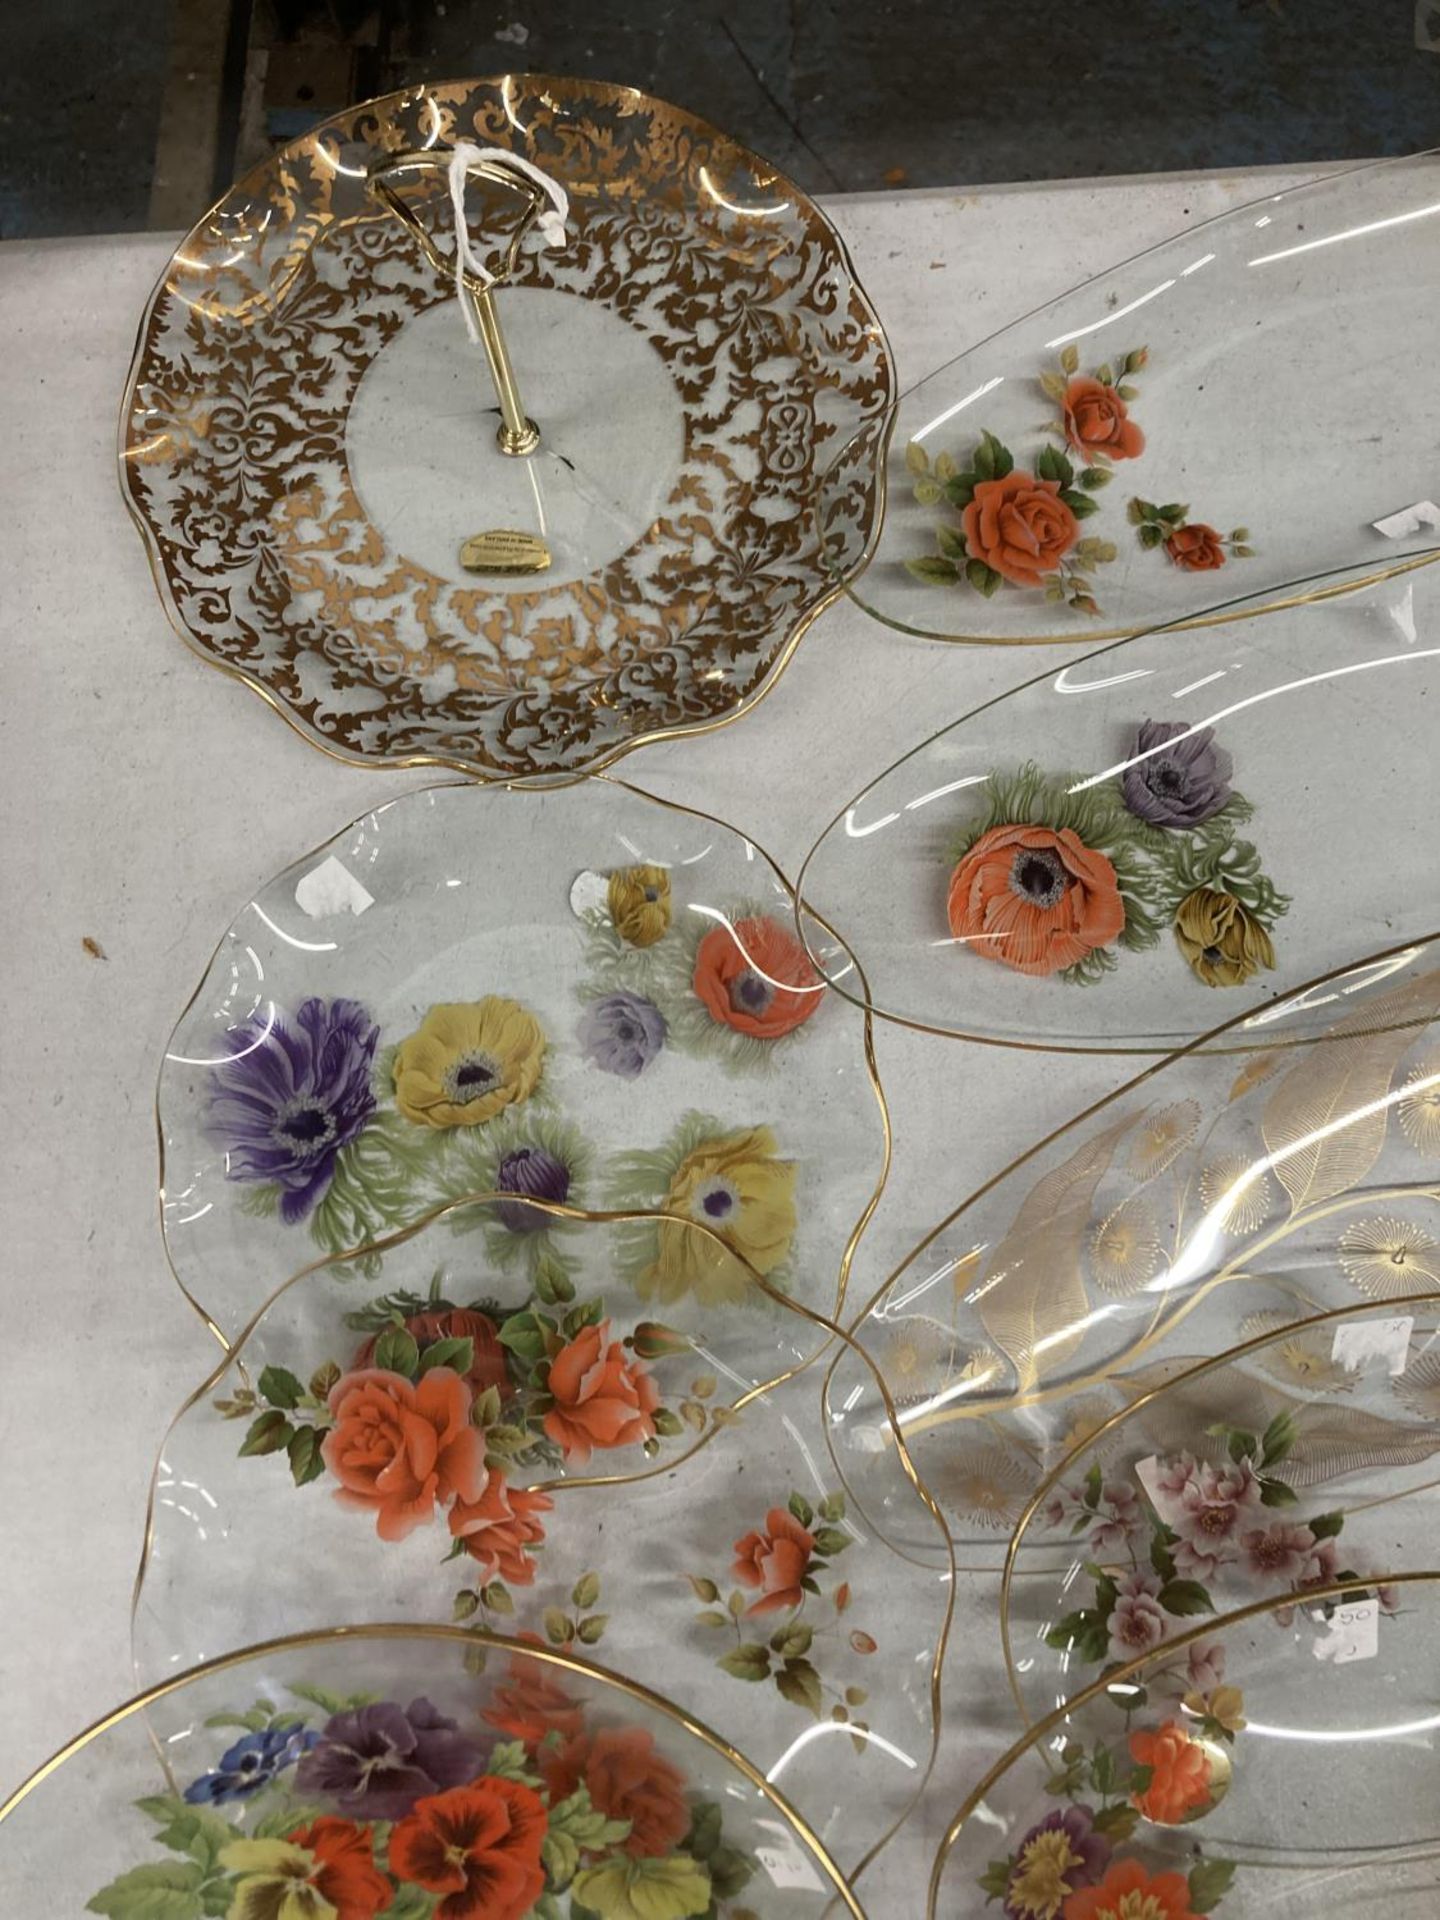 A QUANTITY OF GLASSWARE TO INCLUDE FLORAL PRINTED SERVING PLATES AND CARNIVAL GLASS BOWLS - Image 5 of 6